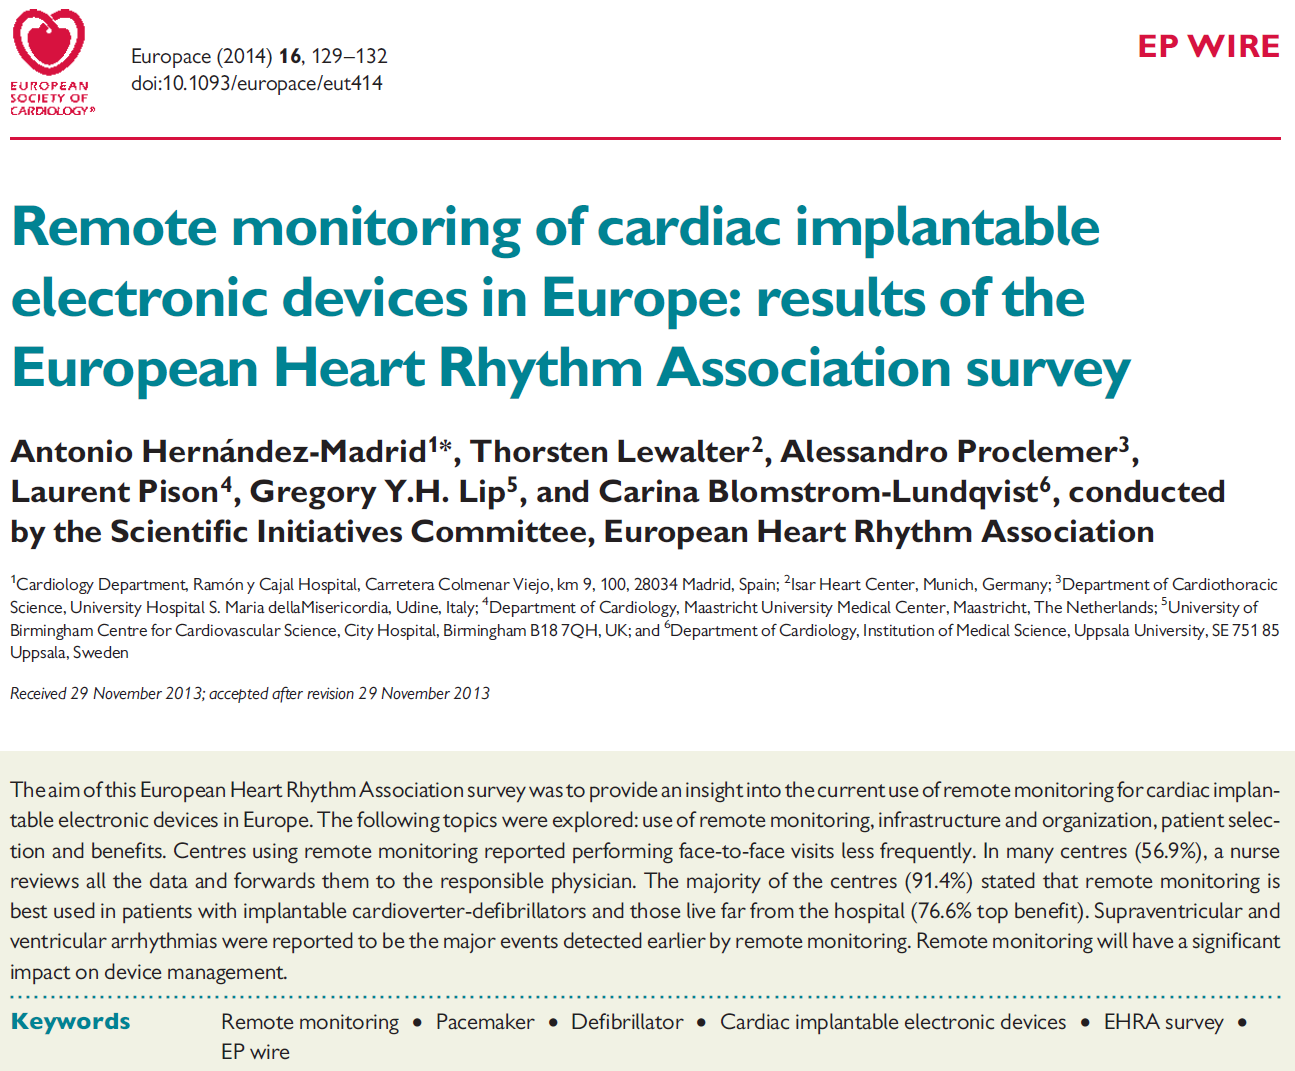 EHRA Survey: Remote monitoring of CIEDS in